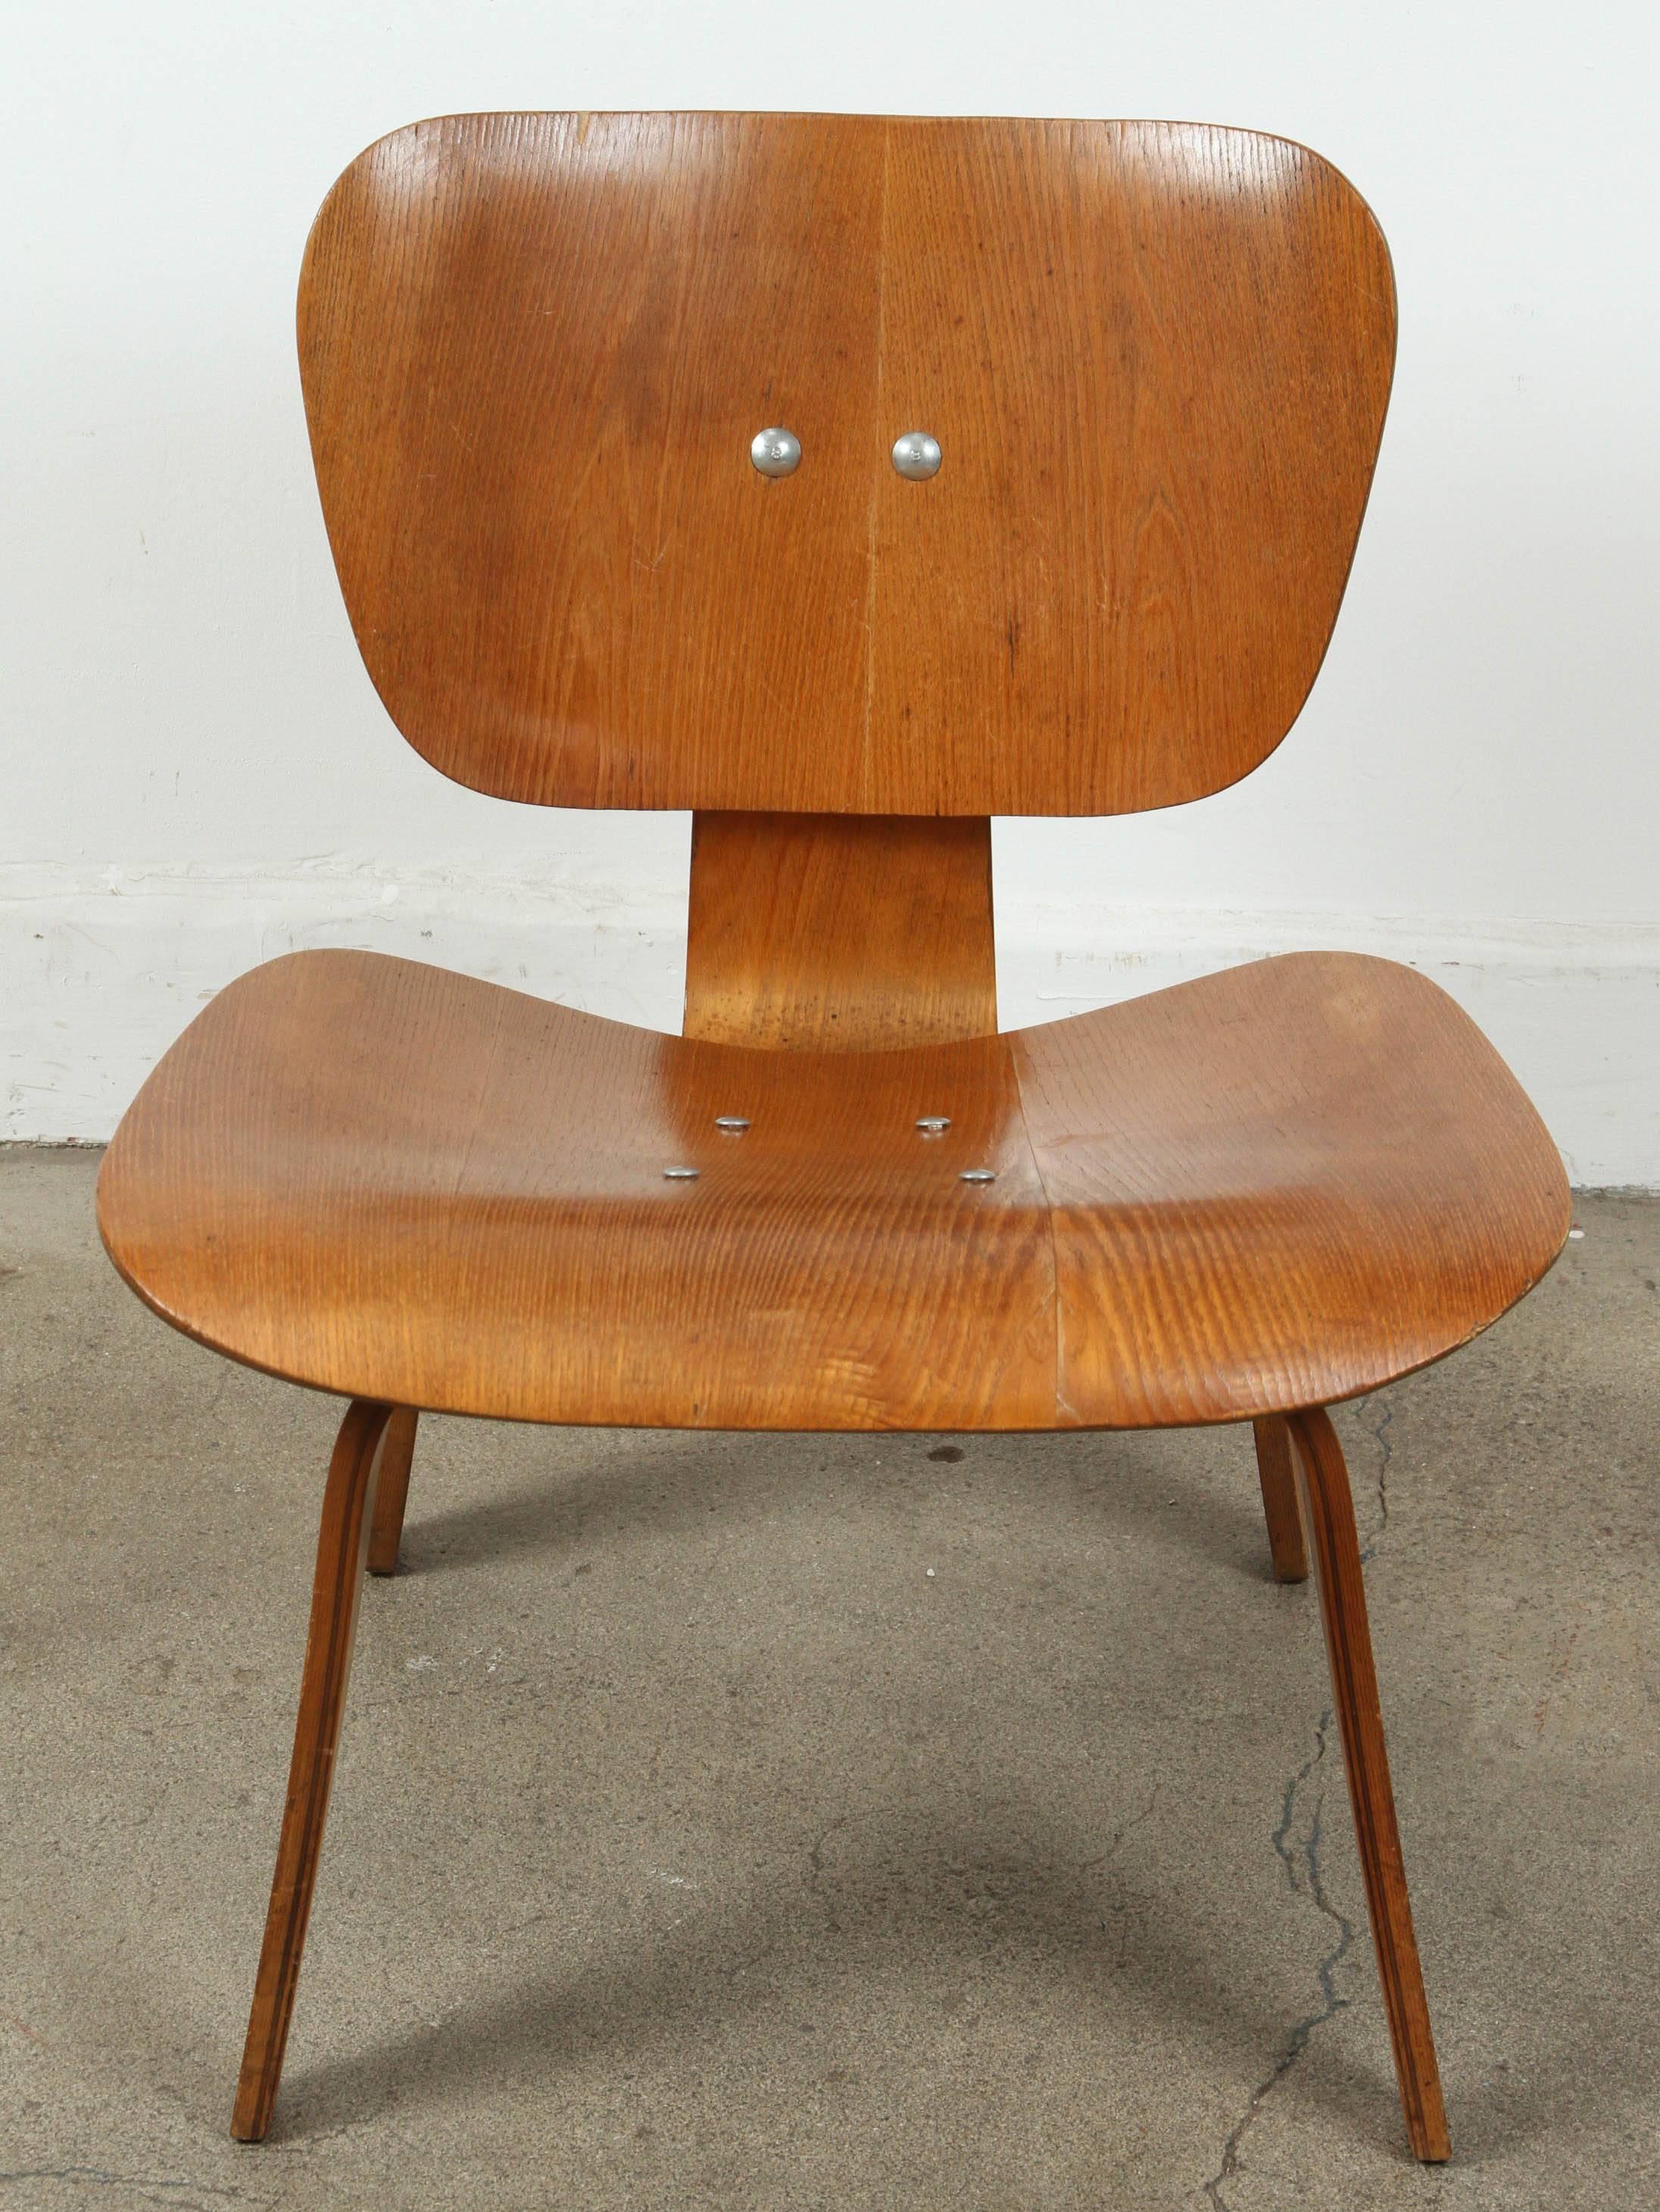 Early 1945 Charles Eames bentwood LCW, (lounge chair wood) for Herman Miller by Evans Production.
Molded plywood with a single rubber shock mount chair in the back and the early 5-2-5 mounting pattern from 1940s.
This iconic chair is one of the